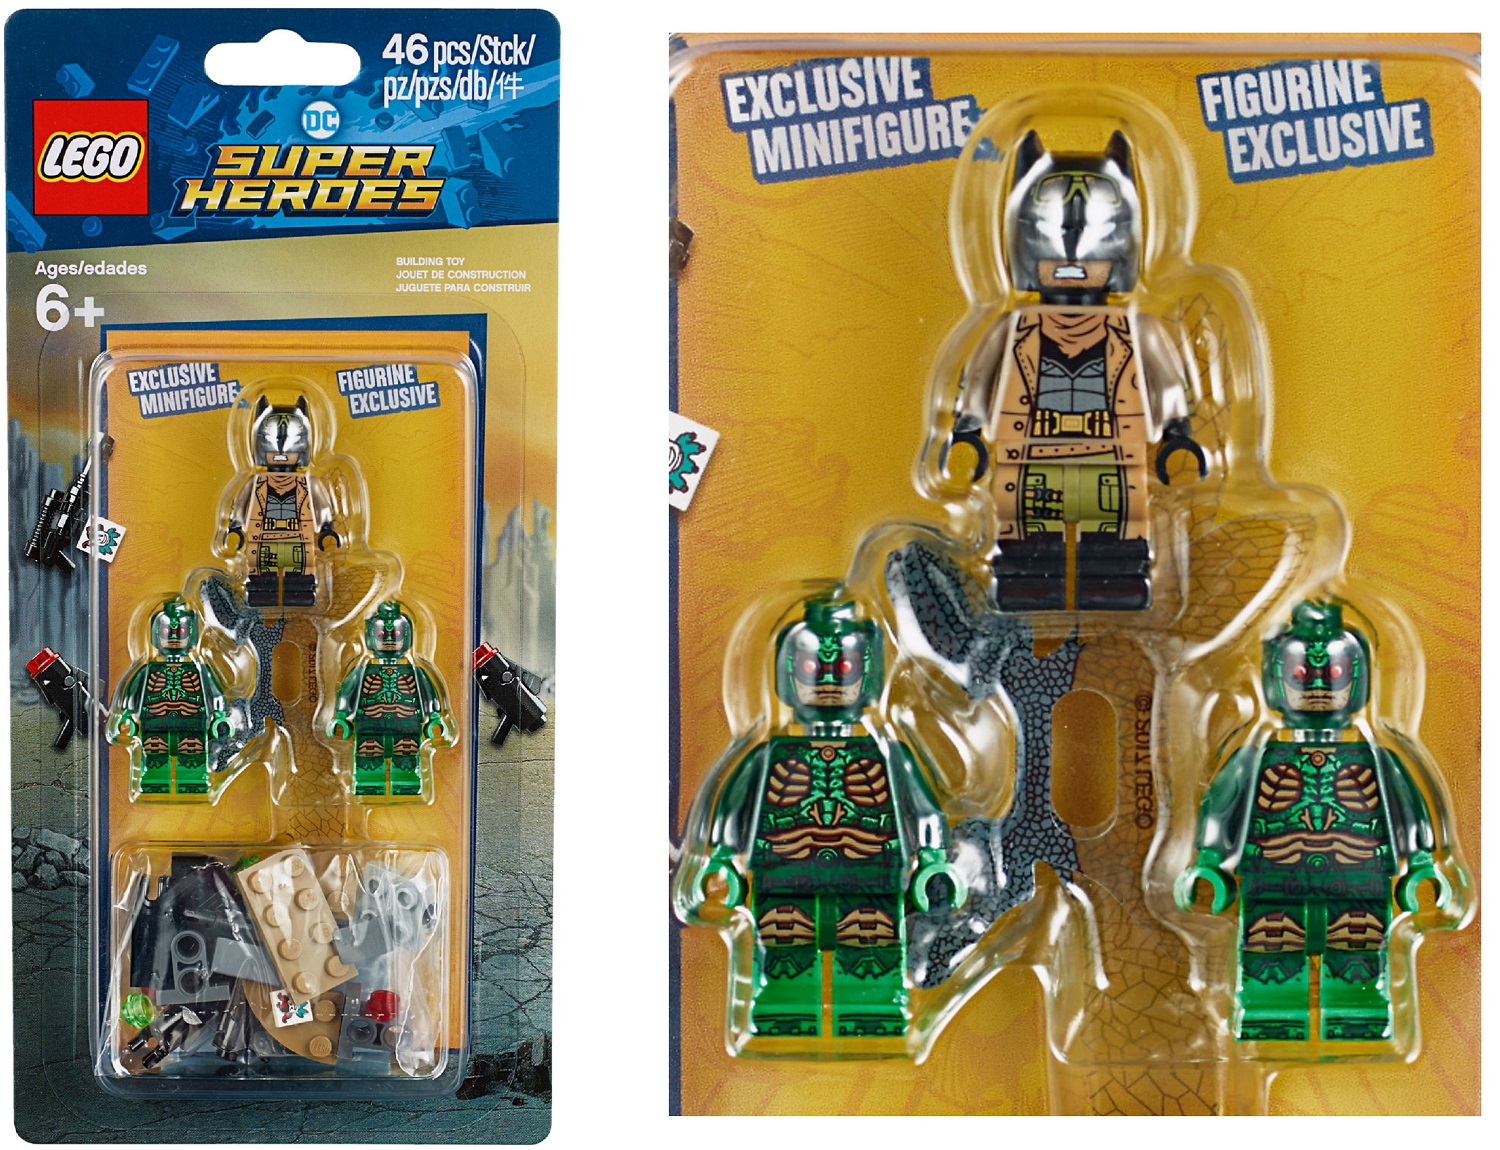 Lego 853744 - Knightmare Batman and 2 Parademon minifigures with detachable  wings - Minifigure Price Guide